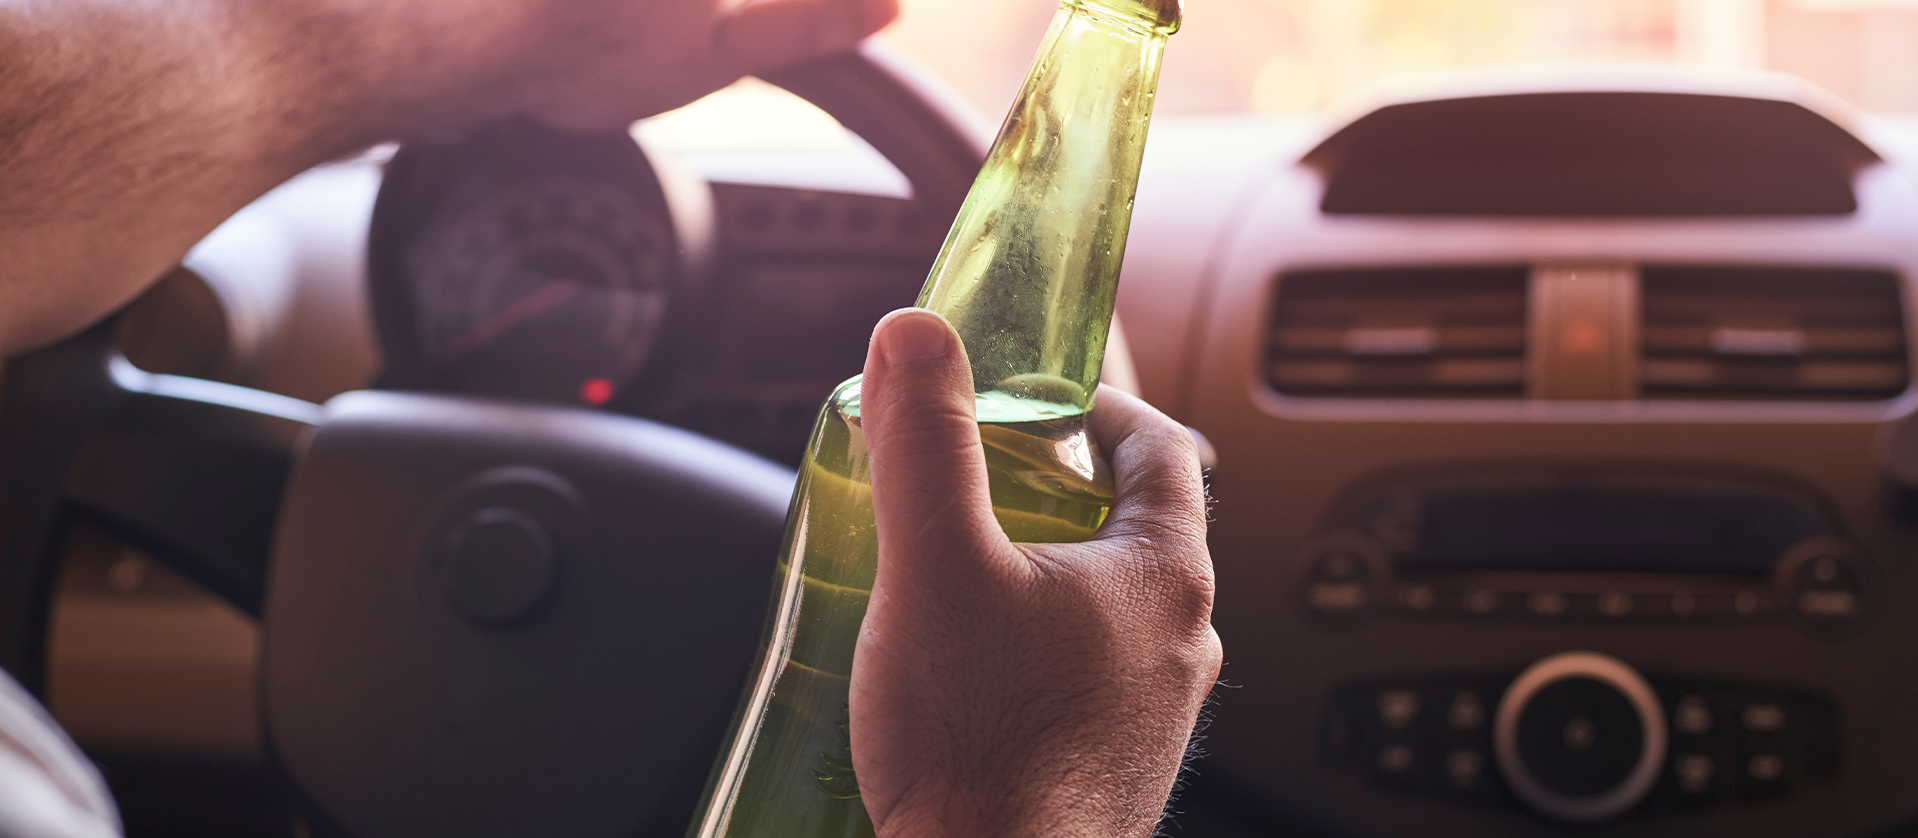 An unrecognizable man drinking beer while driving car